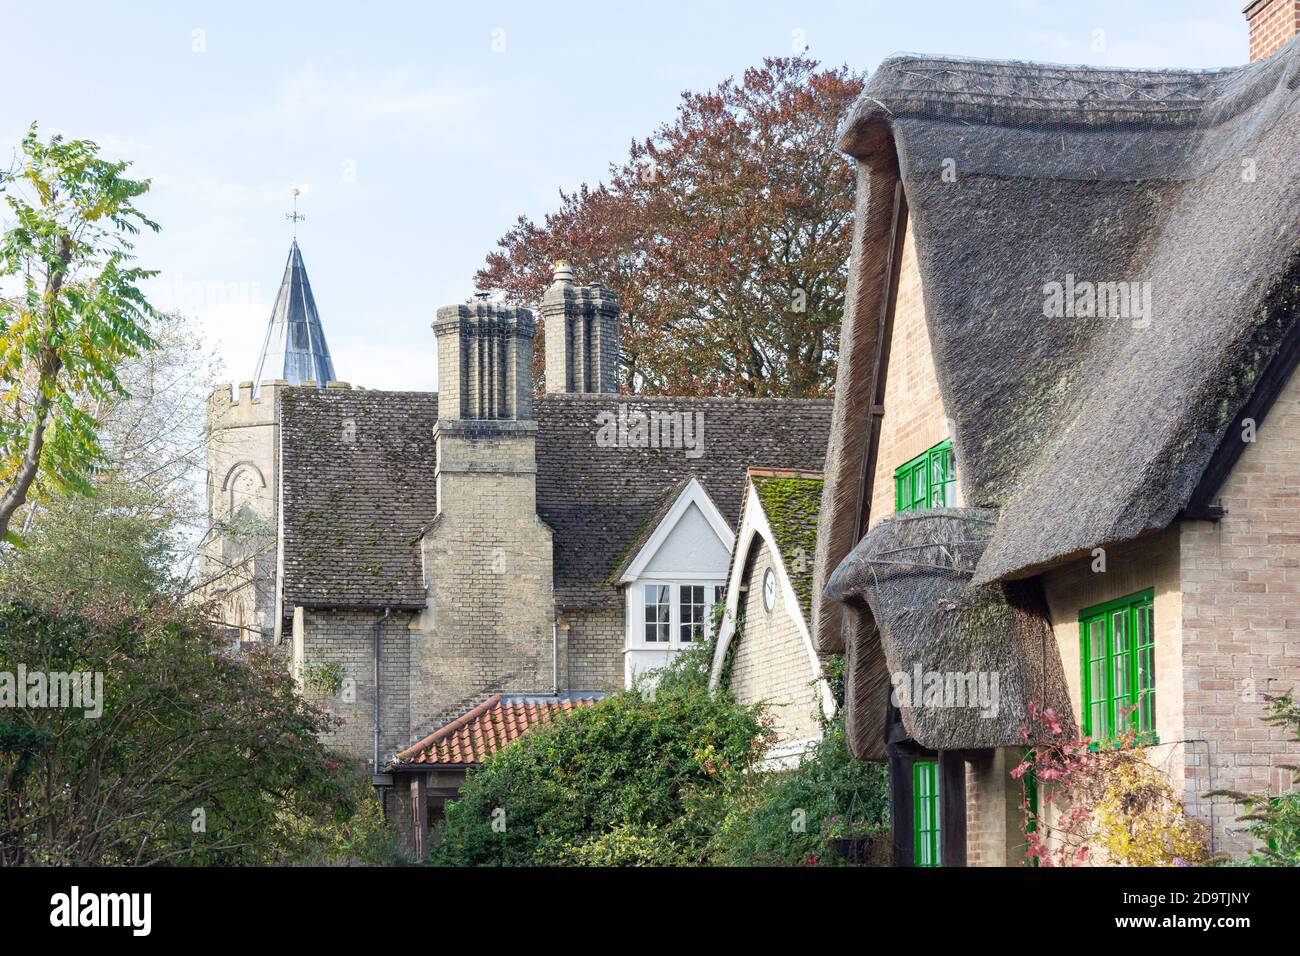 Period cottages and St Mary's Church, High Street, Great Shelford, Cambridgeshire, England, United Kingdom Stock Photo